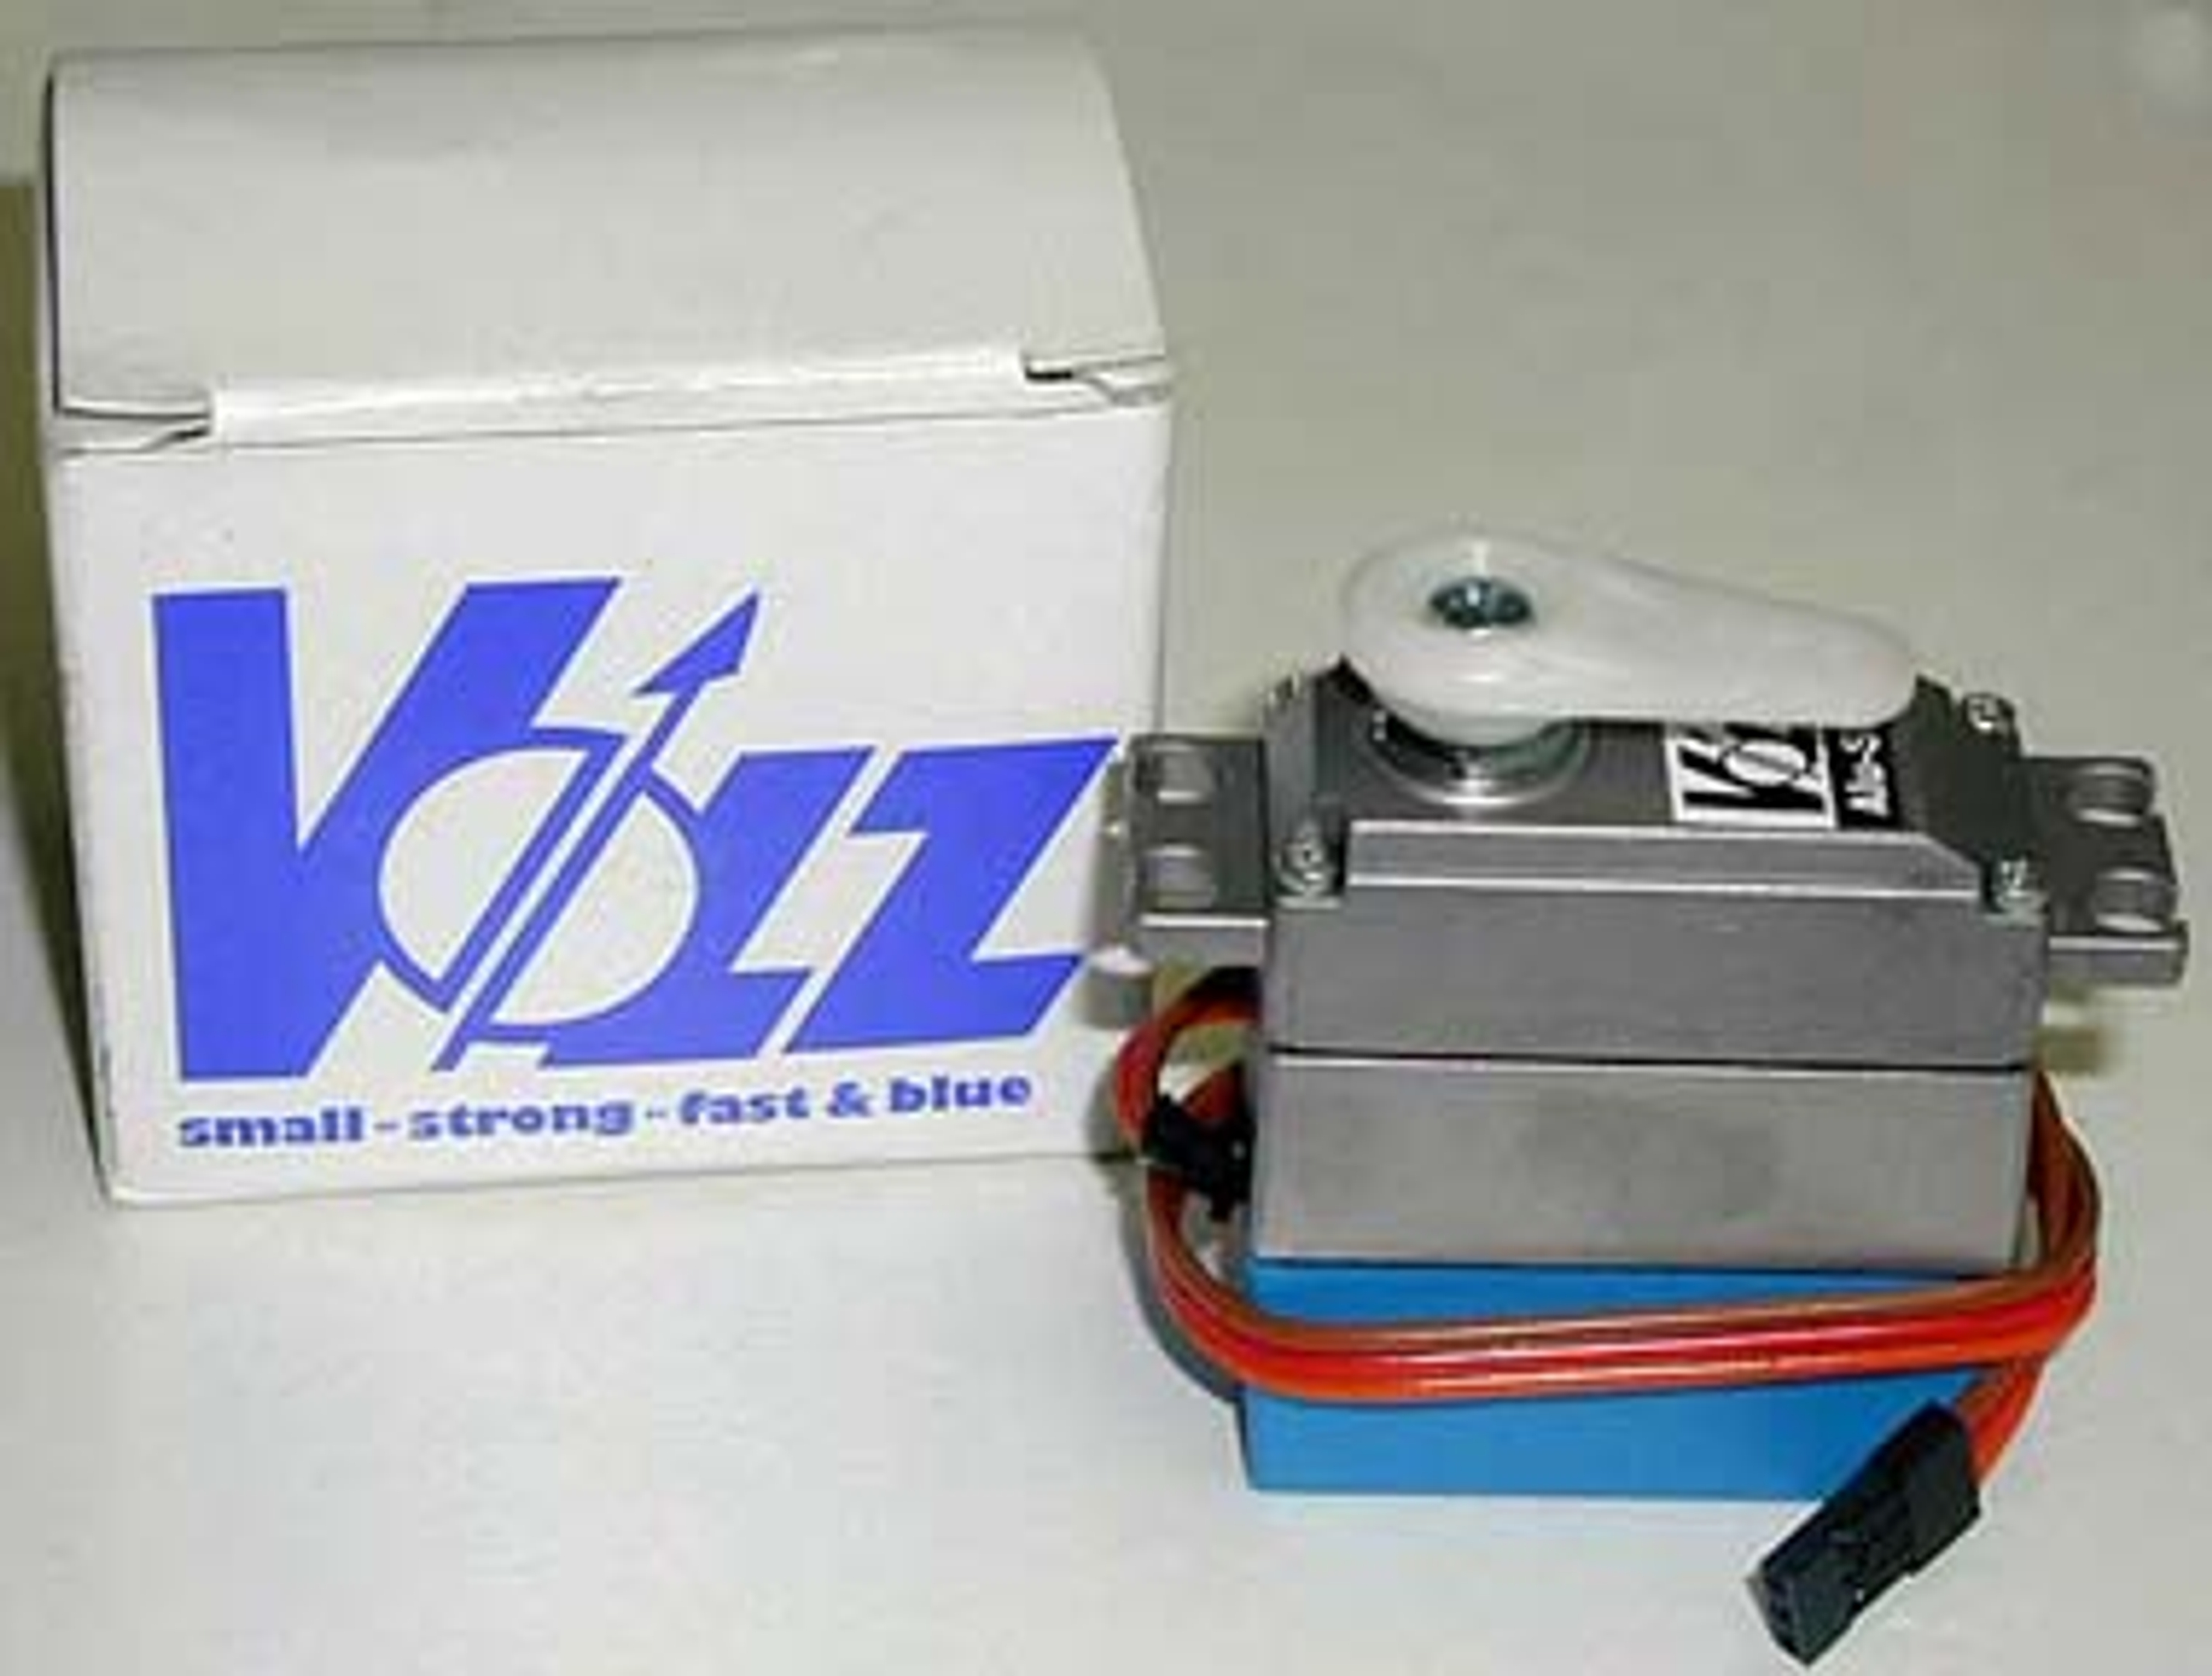 VOLZ-Servo, y1060 - 1pce. -Special offer-